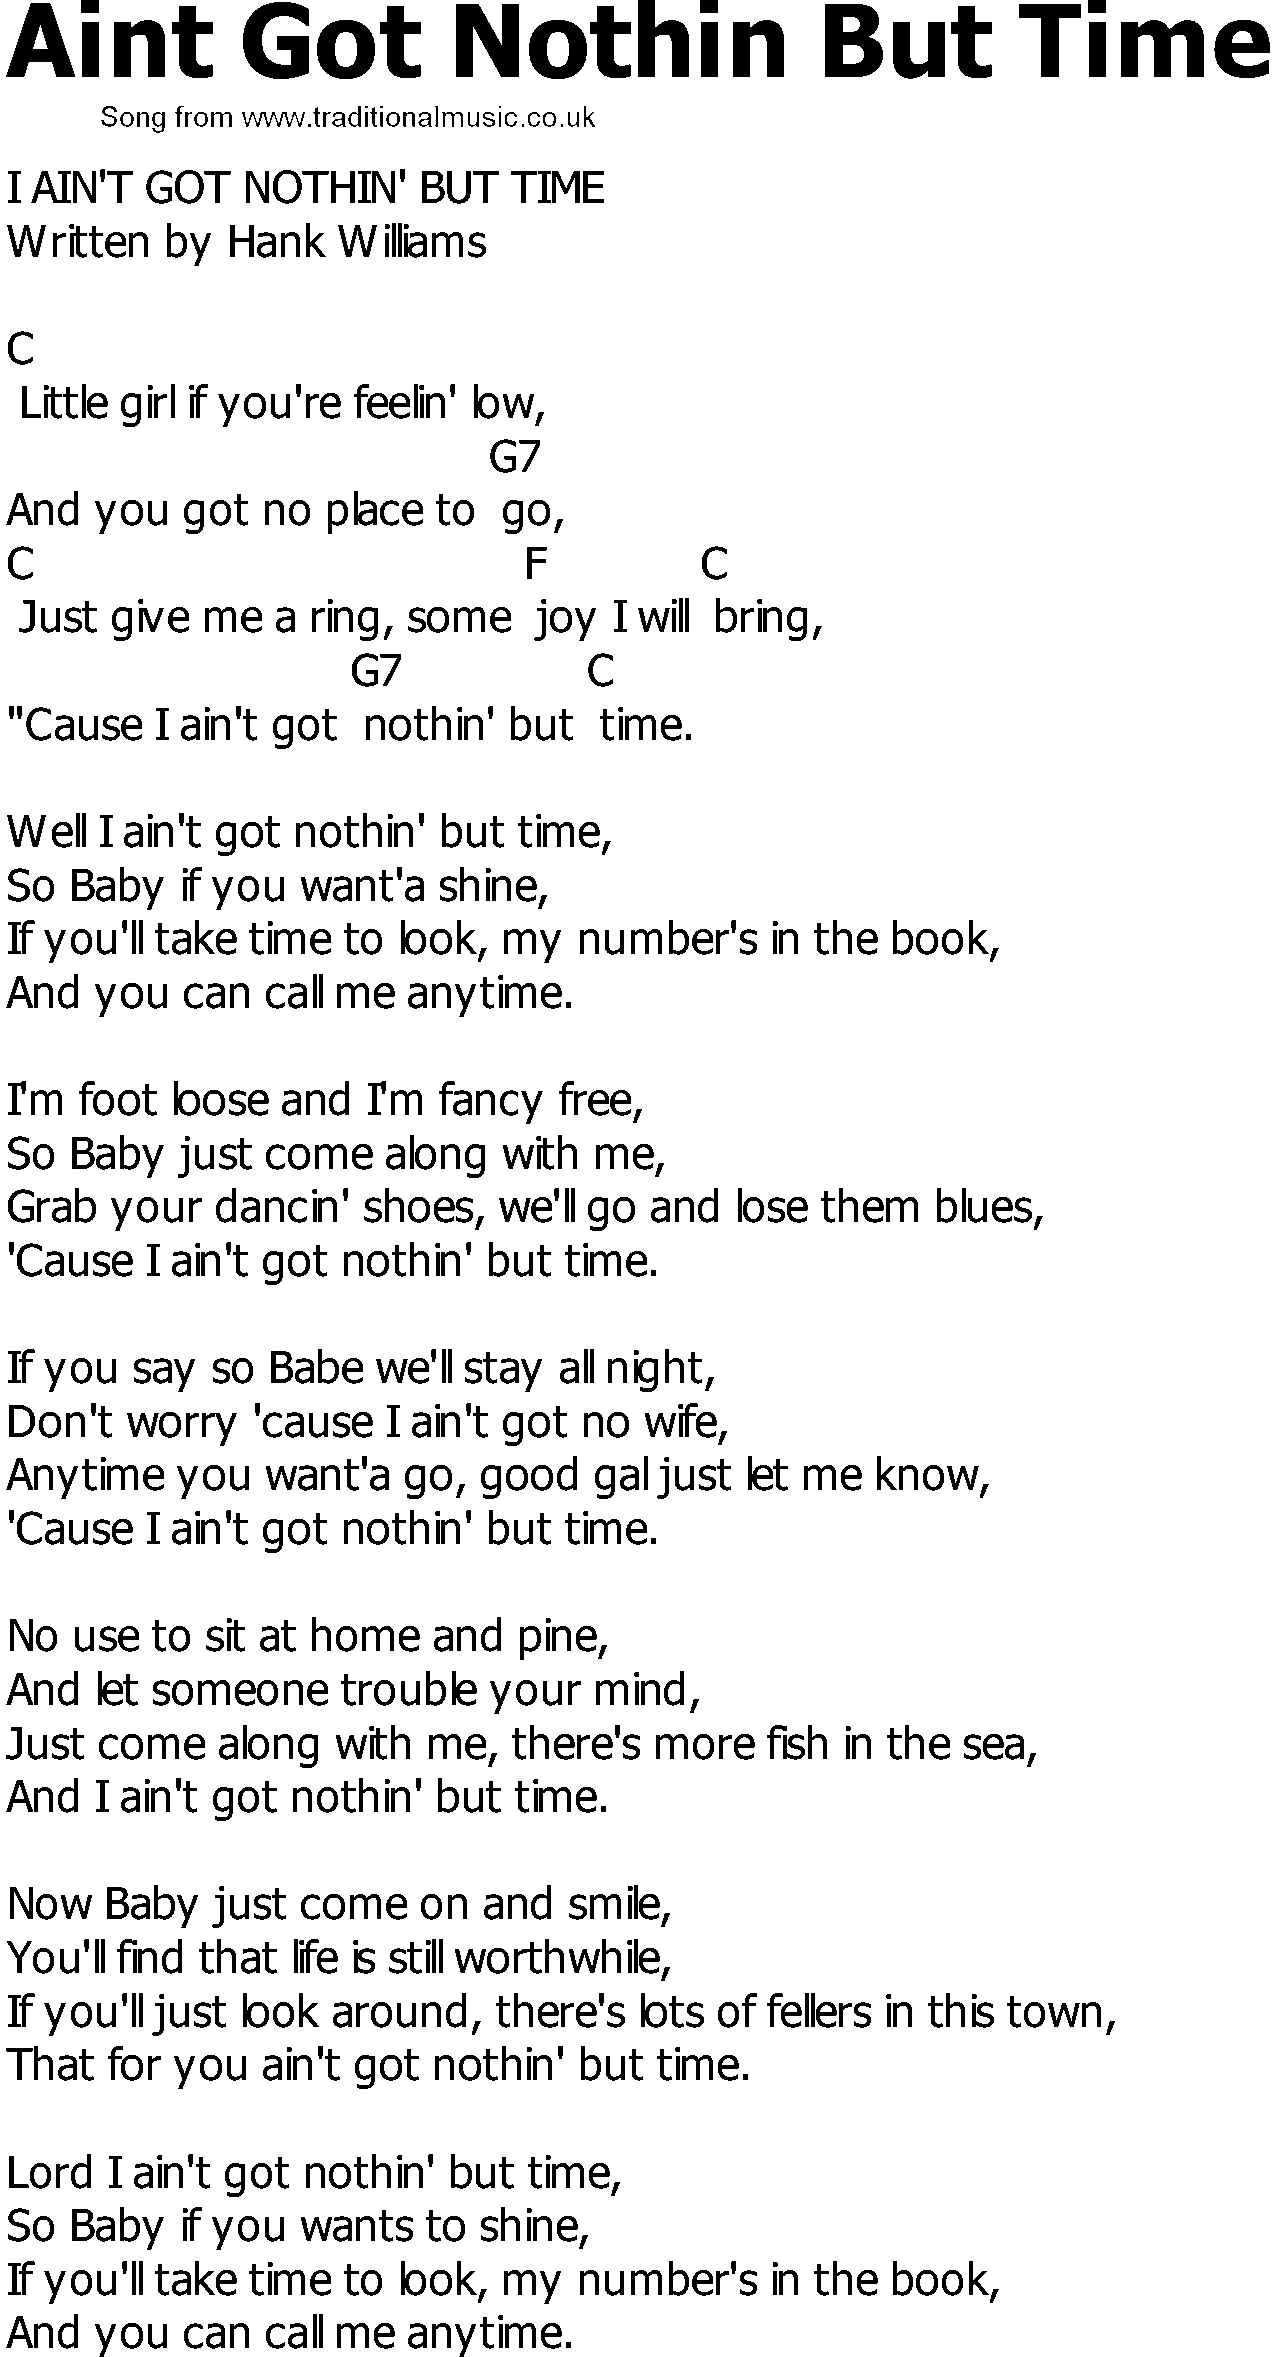 Old Country song lyrics with chords - Aint Got Nothin But Time